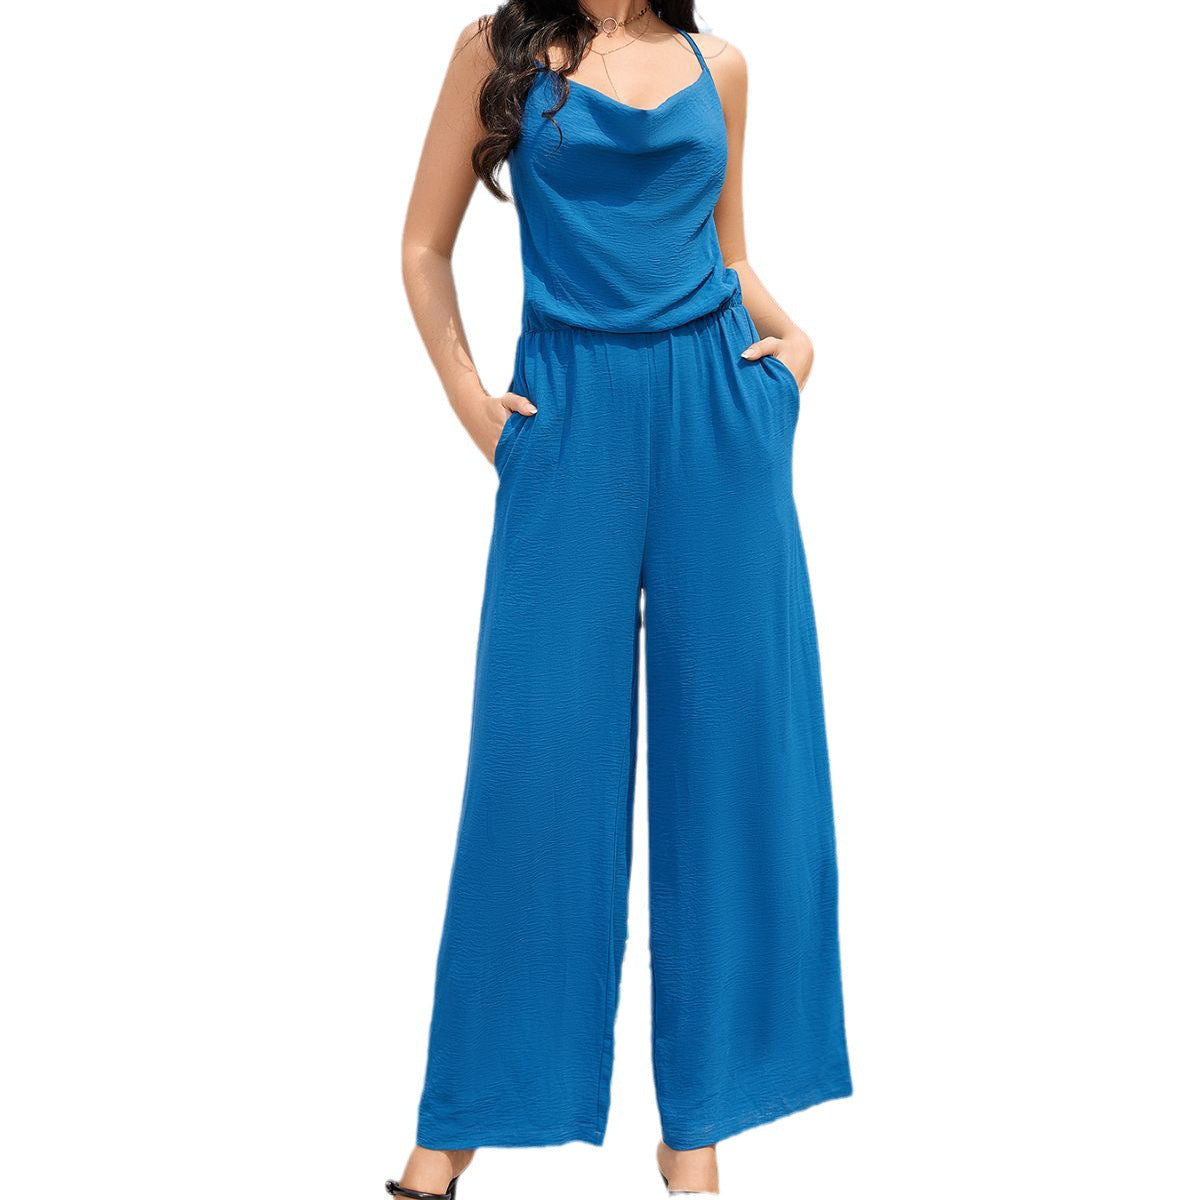 Women Clothing Sling Collar Wide Leg Pants Summer Casual Simple Casual Trousers